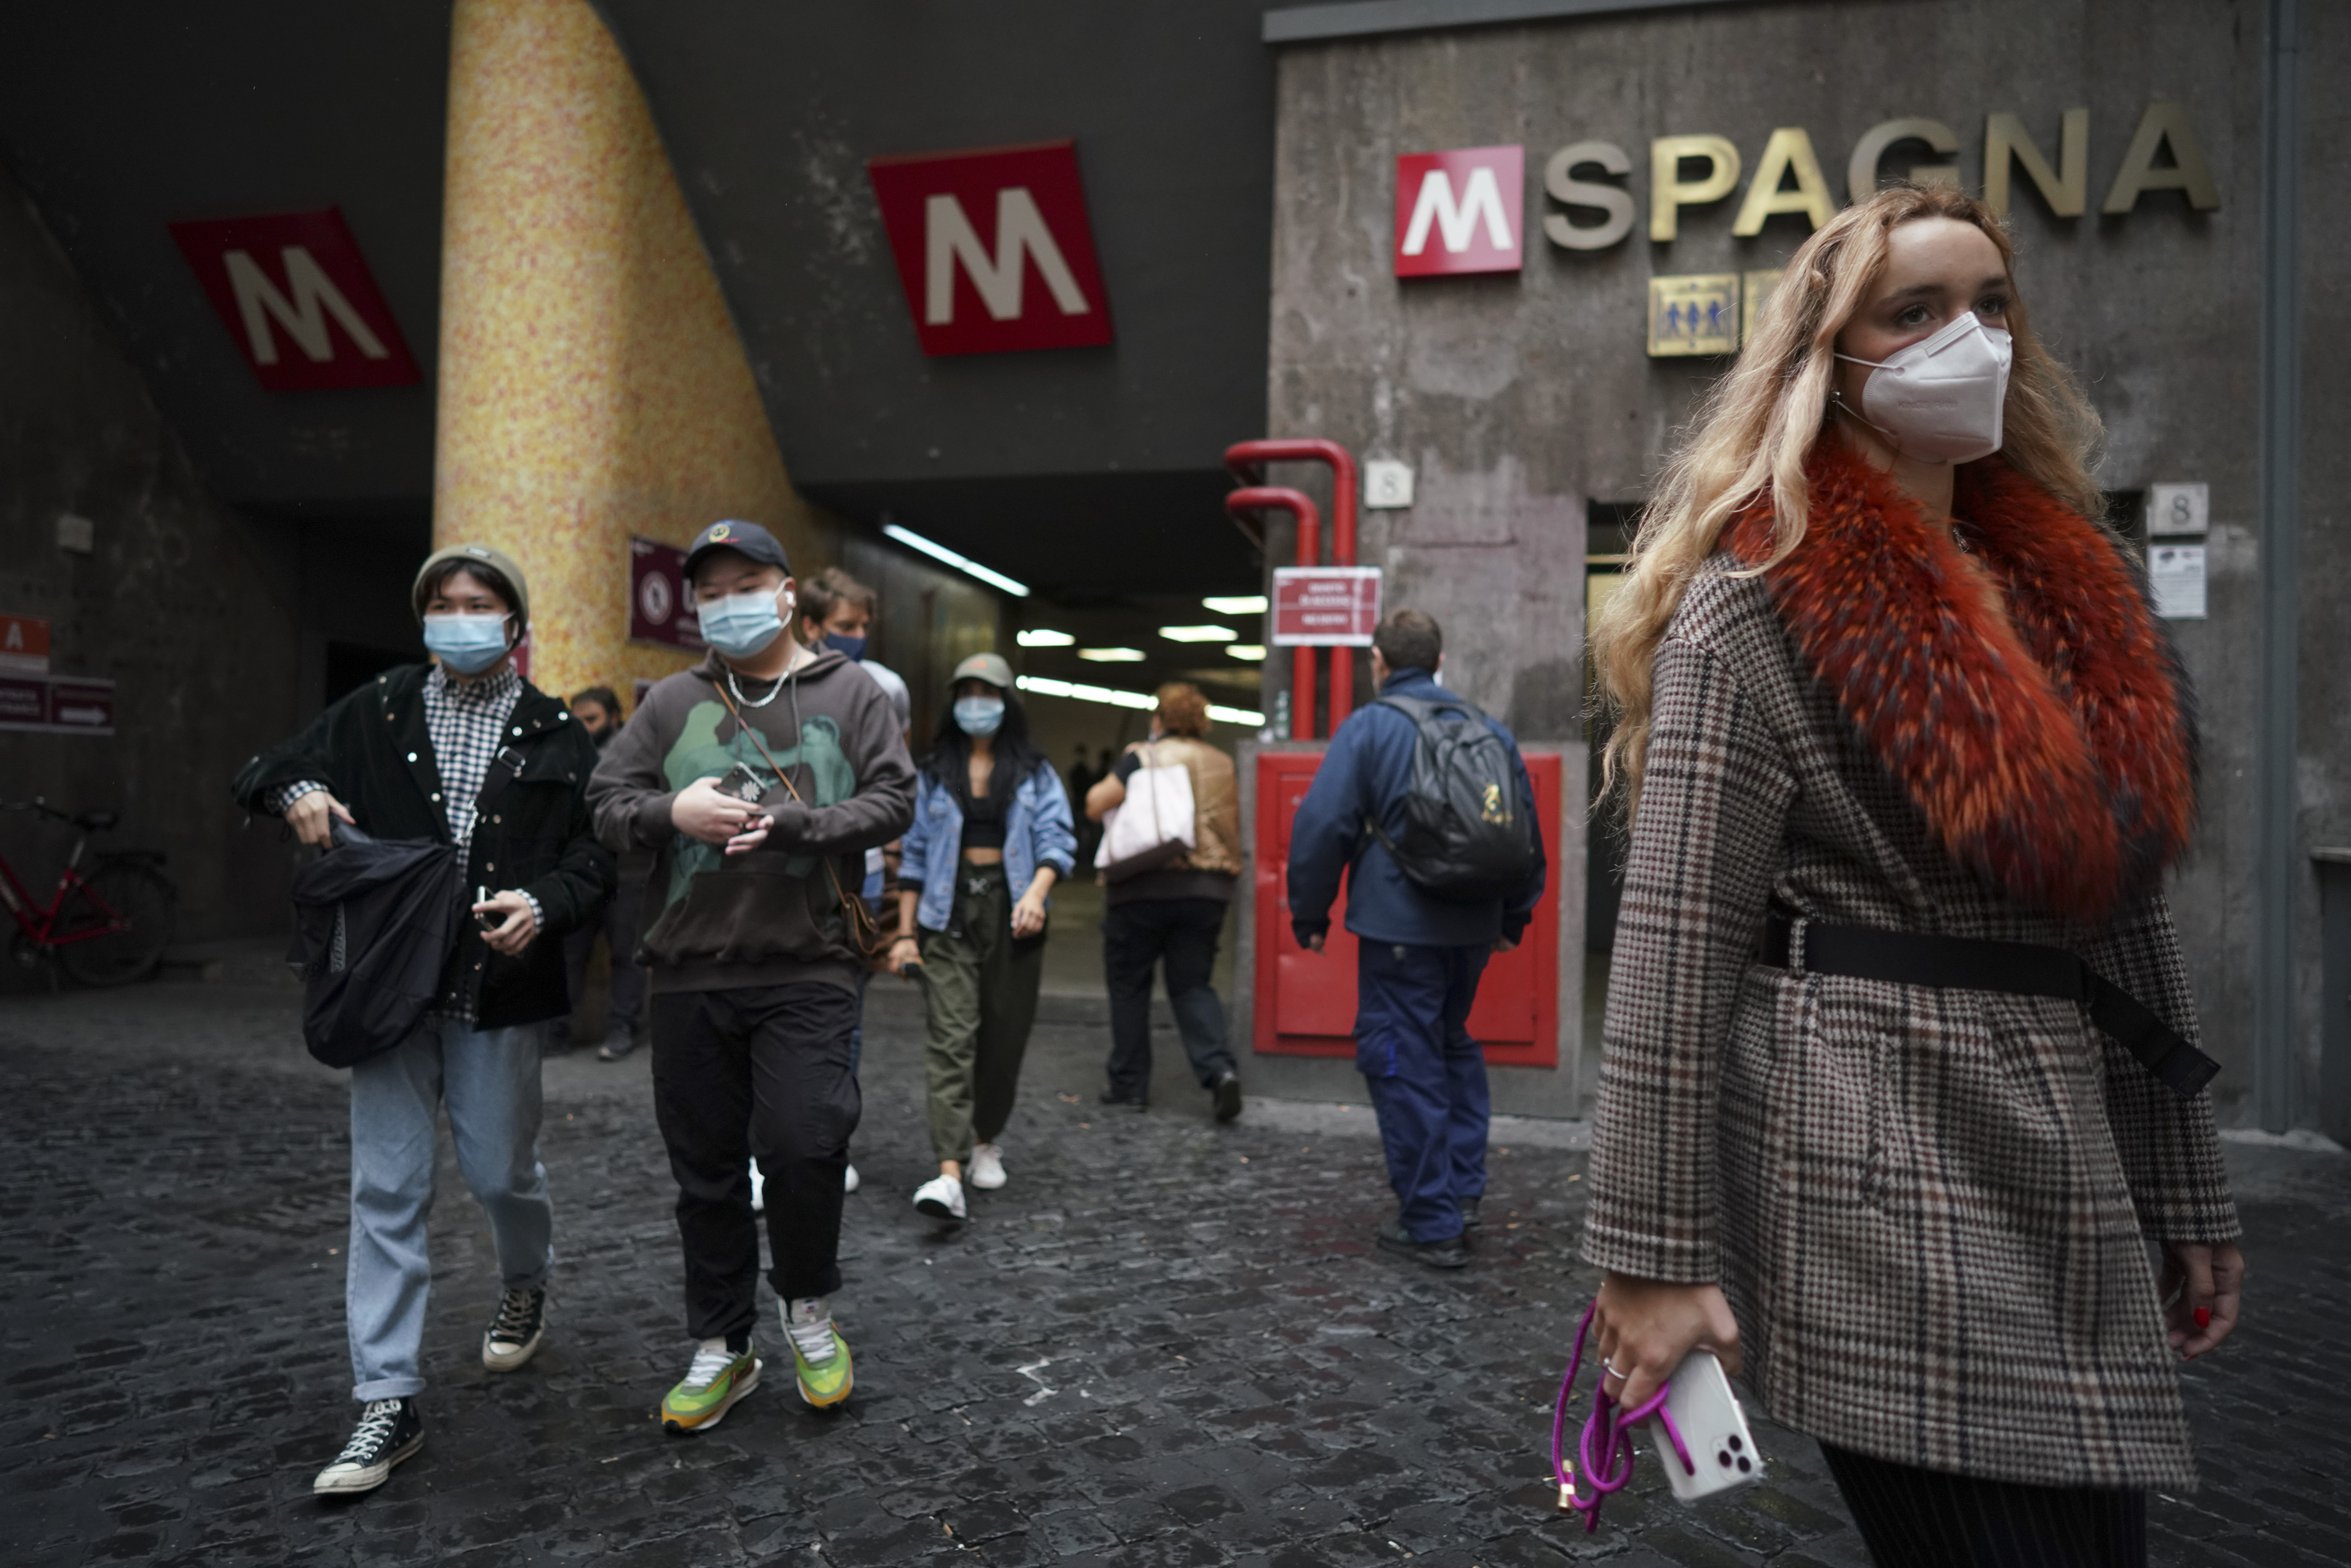 People wear face masks to prevent the spread of COVID-19 as they walk out of a subway station, in Rome, Saturday, Oct. 3, 2020. As of Saturday it is mandatory to wear masks outdoors in Lazio, the region that includes Rome. (AP Photo/Andrew Medichini)